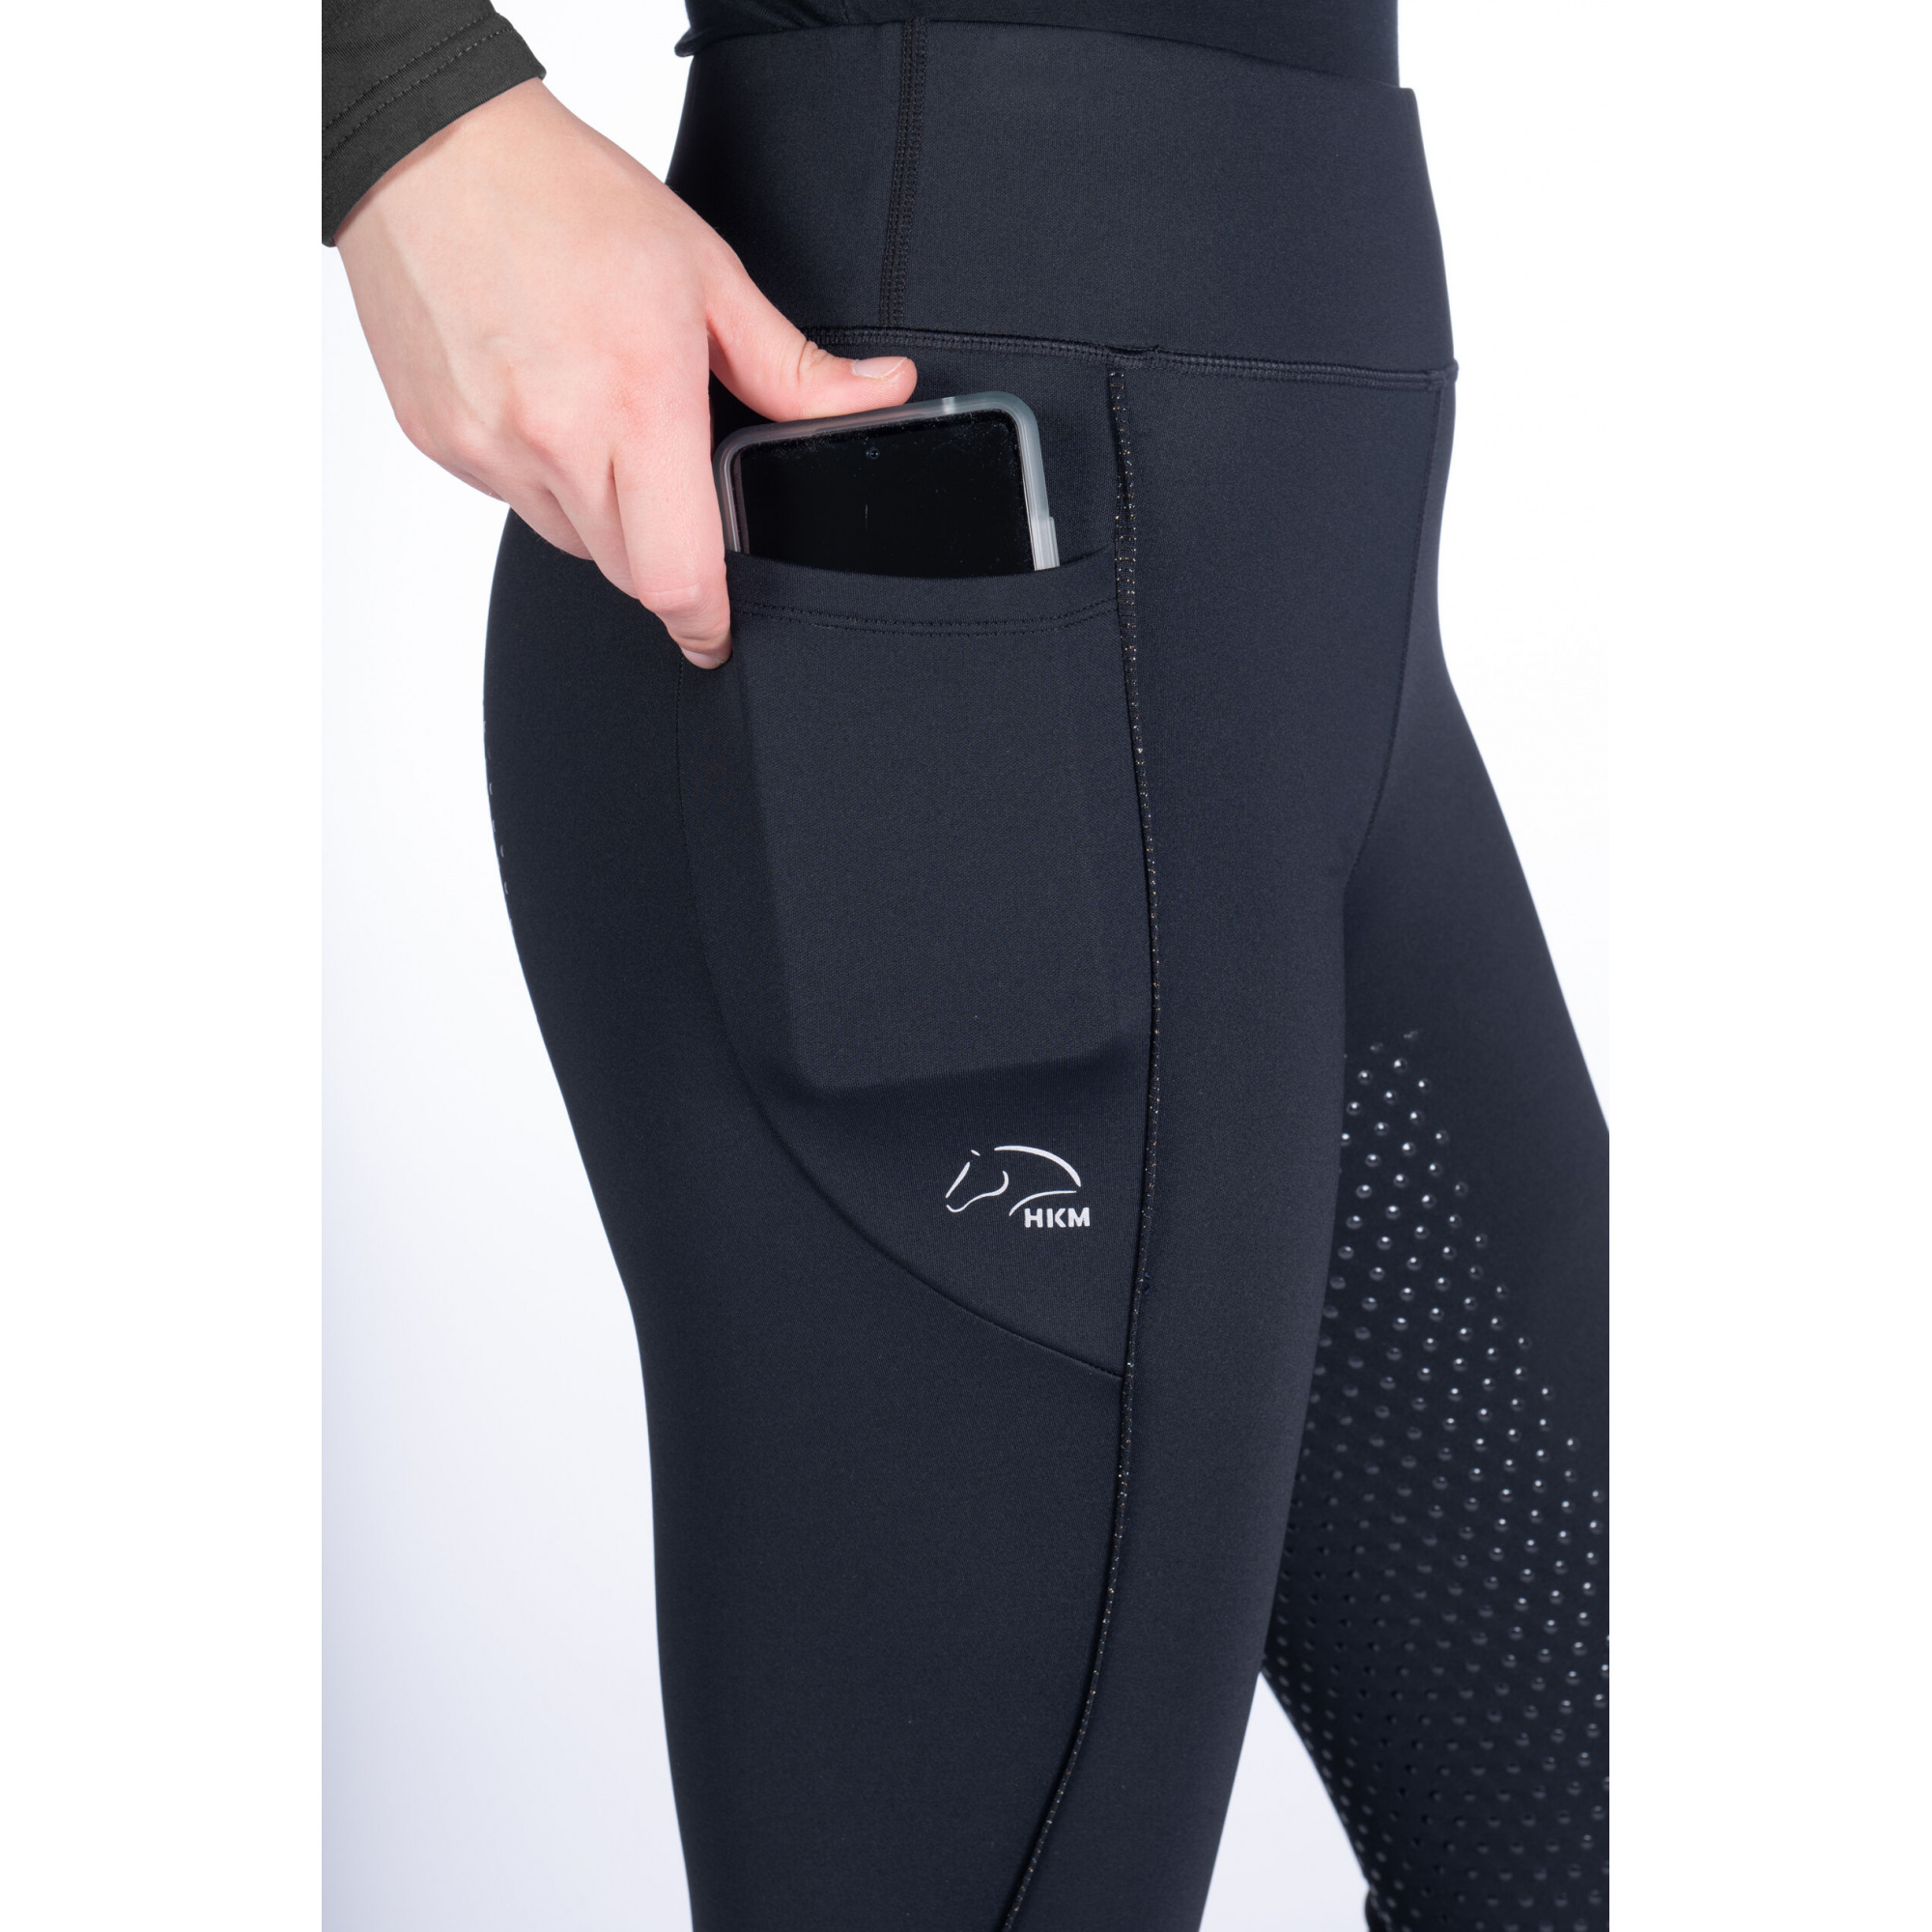 HKM ALICE WOMEN'S EQUESTRIAN LEGGINGS WITH FULL SILICONE EQUISHOP Shop